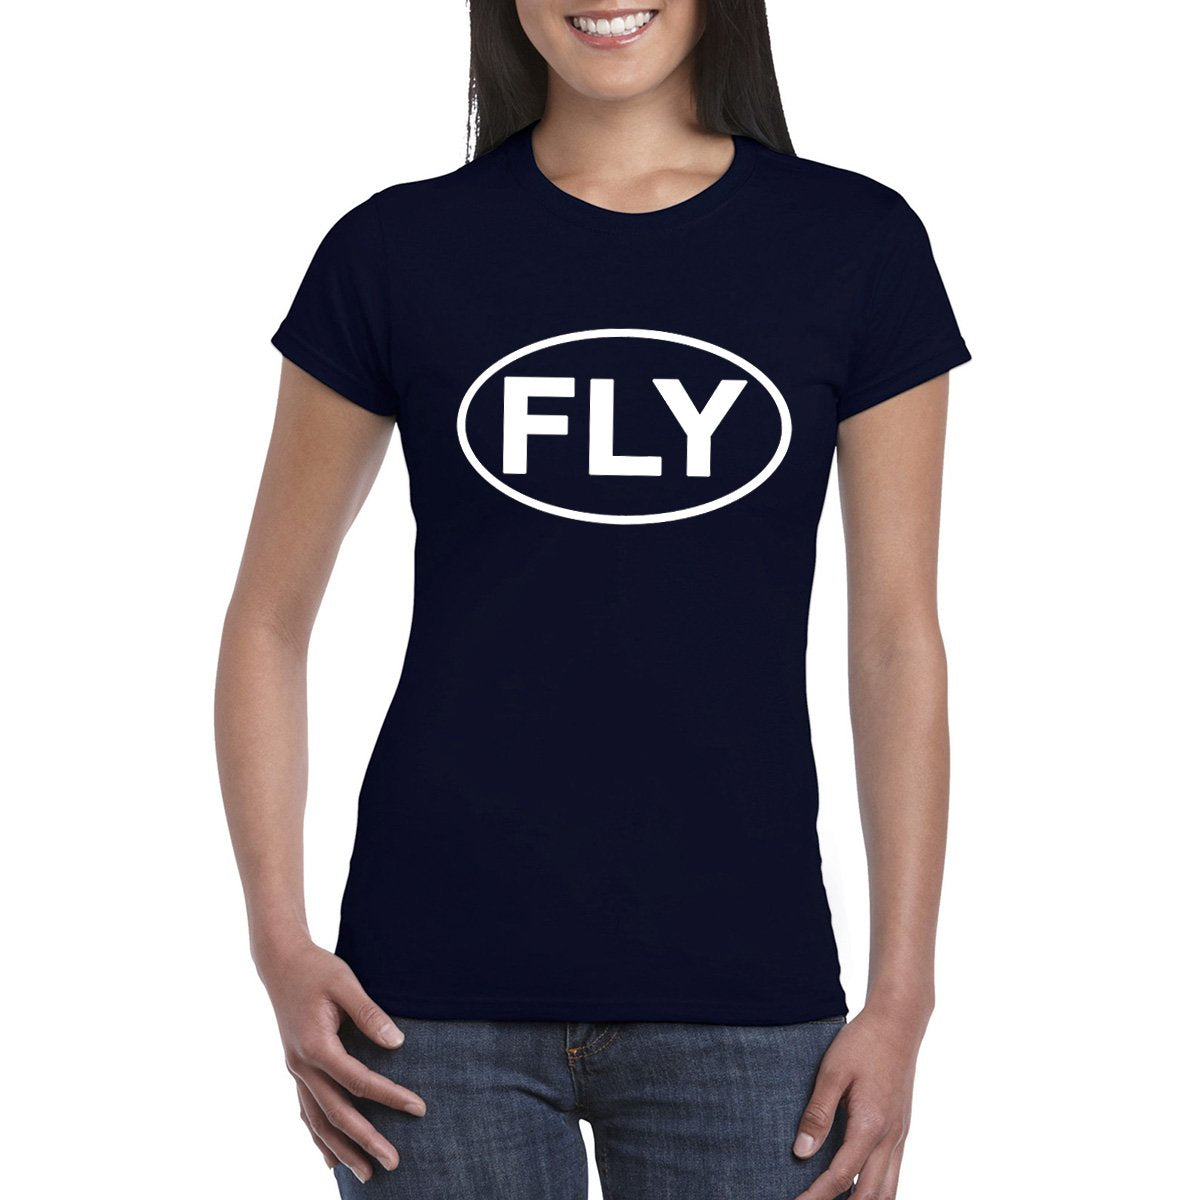 FLY Semi-Fitted Women's V-Neck T-Shirt